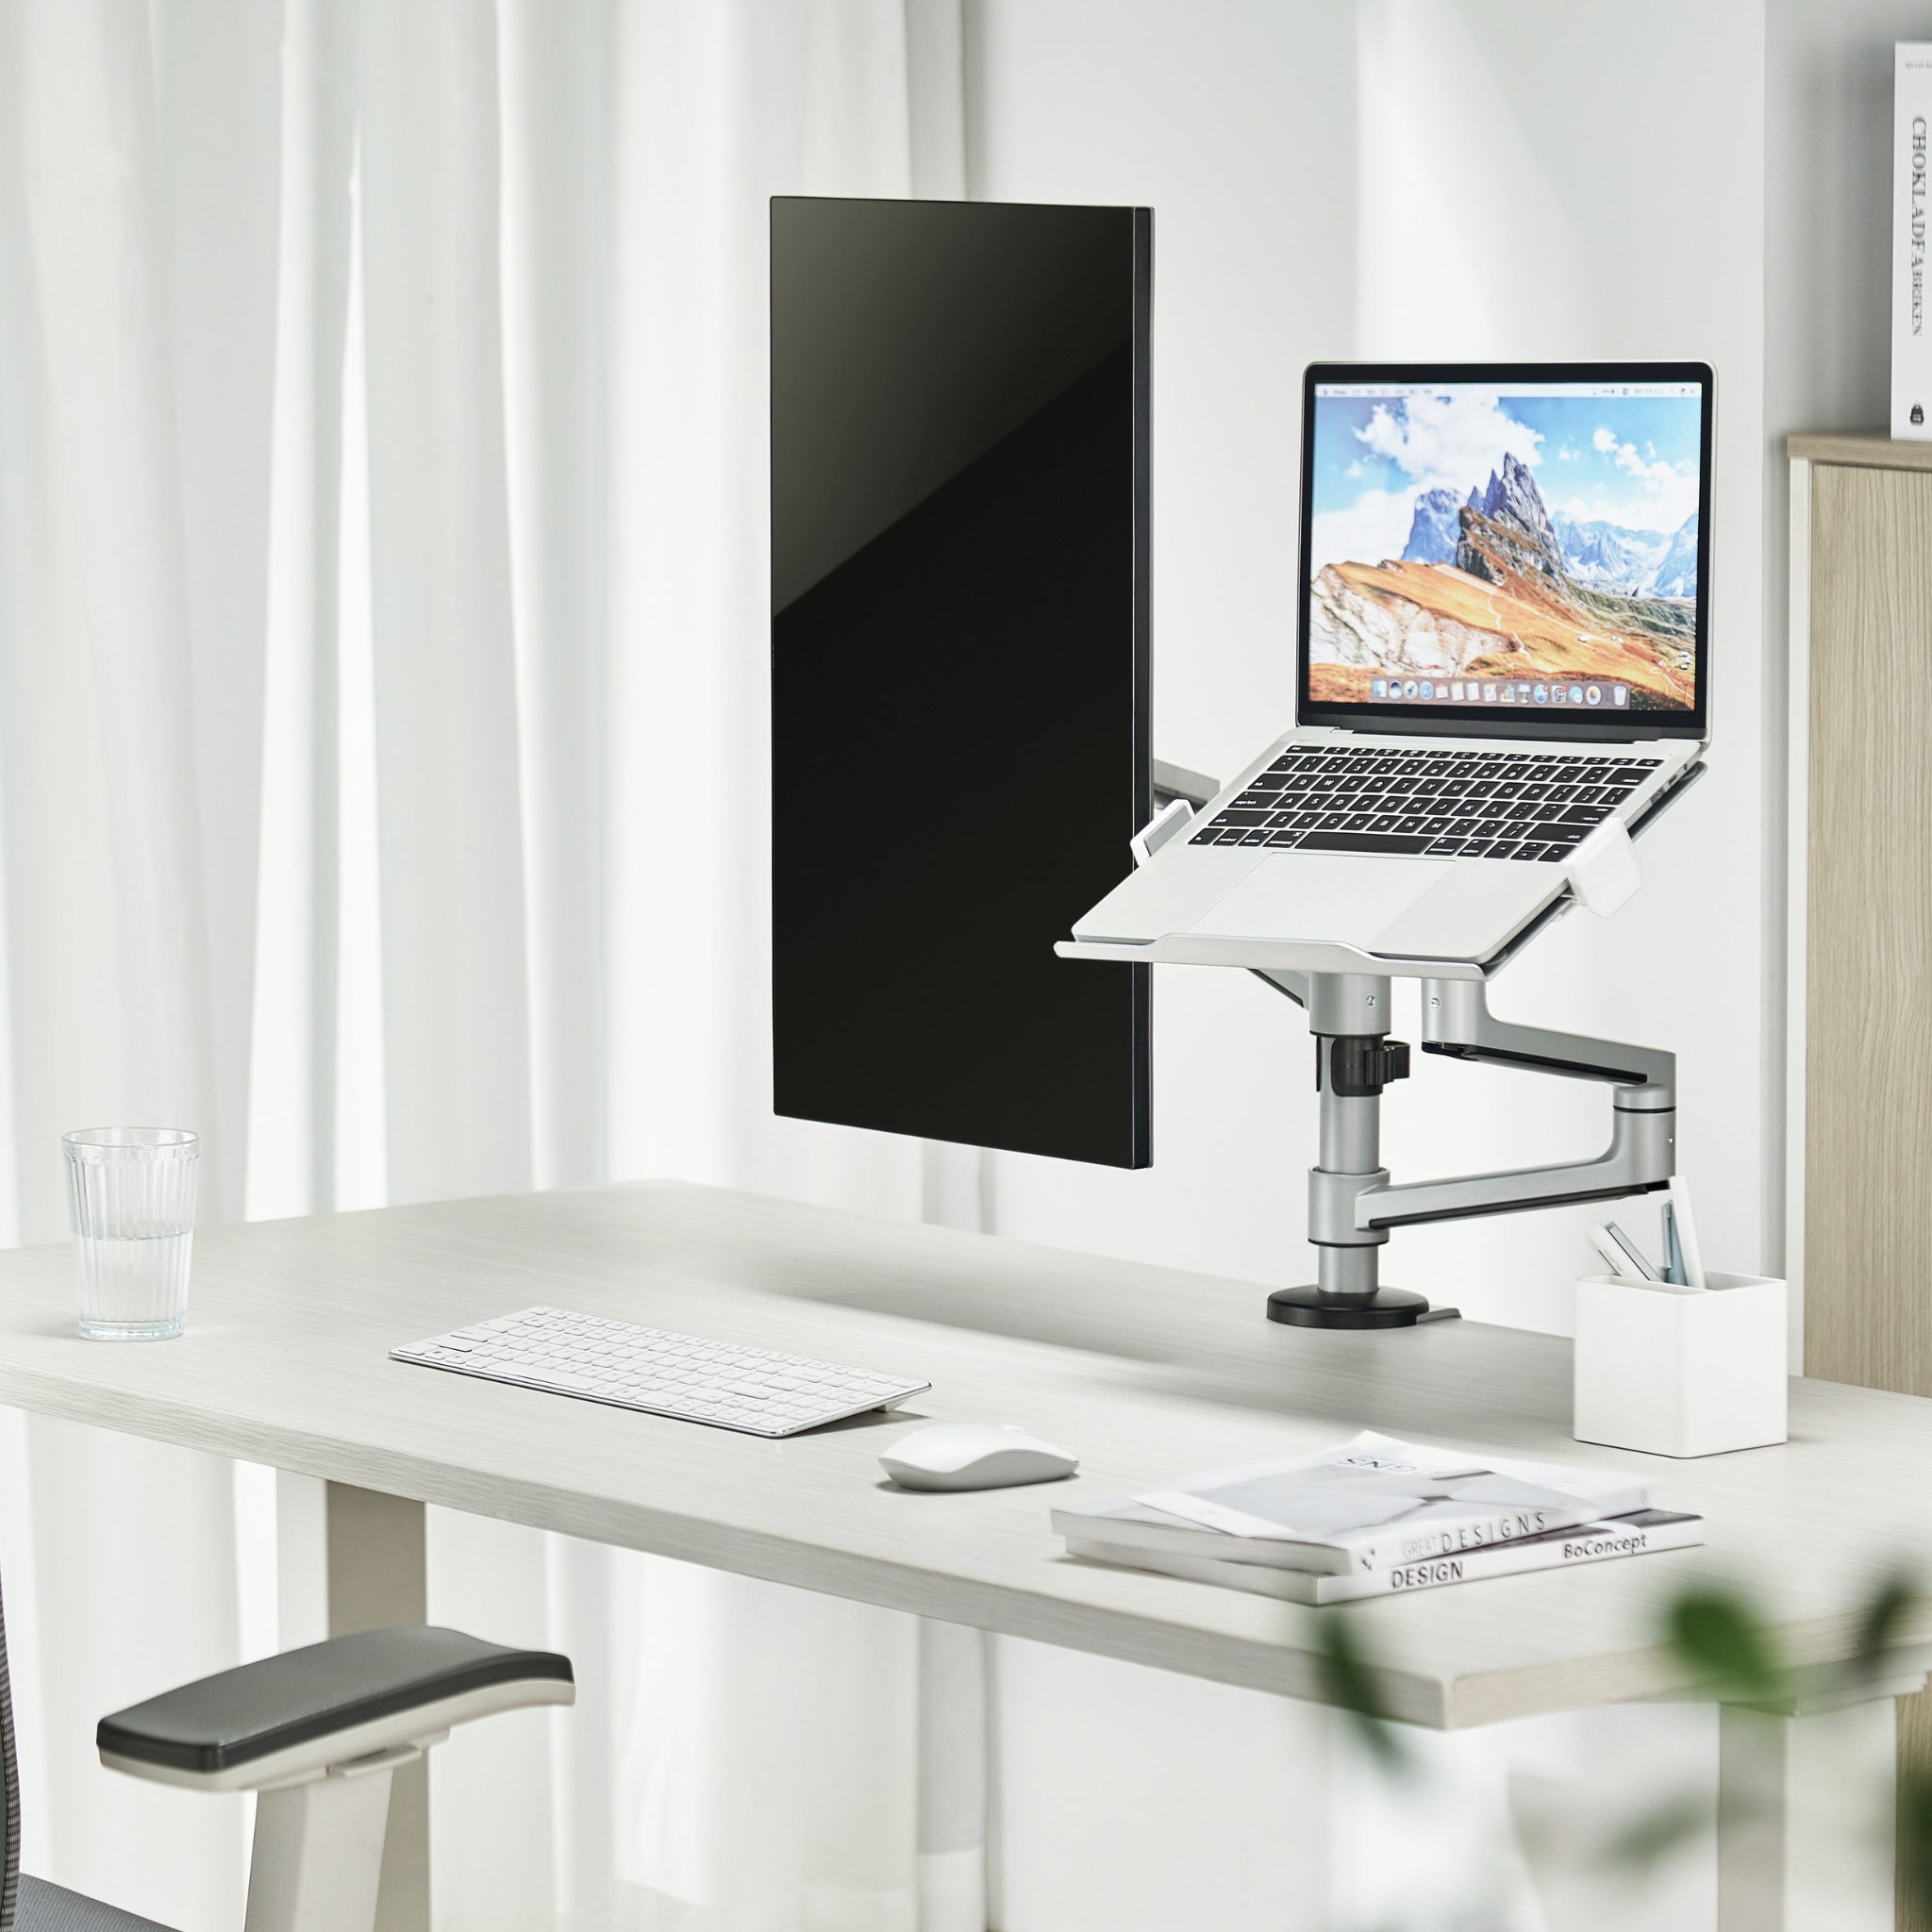 Premium Articulating Monitor Arm with Laptop Tray to suit 17" - 32" Monitors and 11.6" - 17.3" Laptops (Lifetime Warranty)